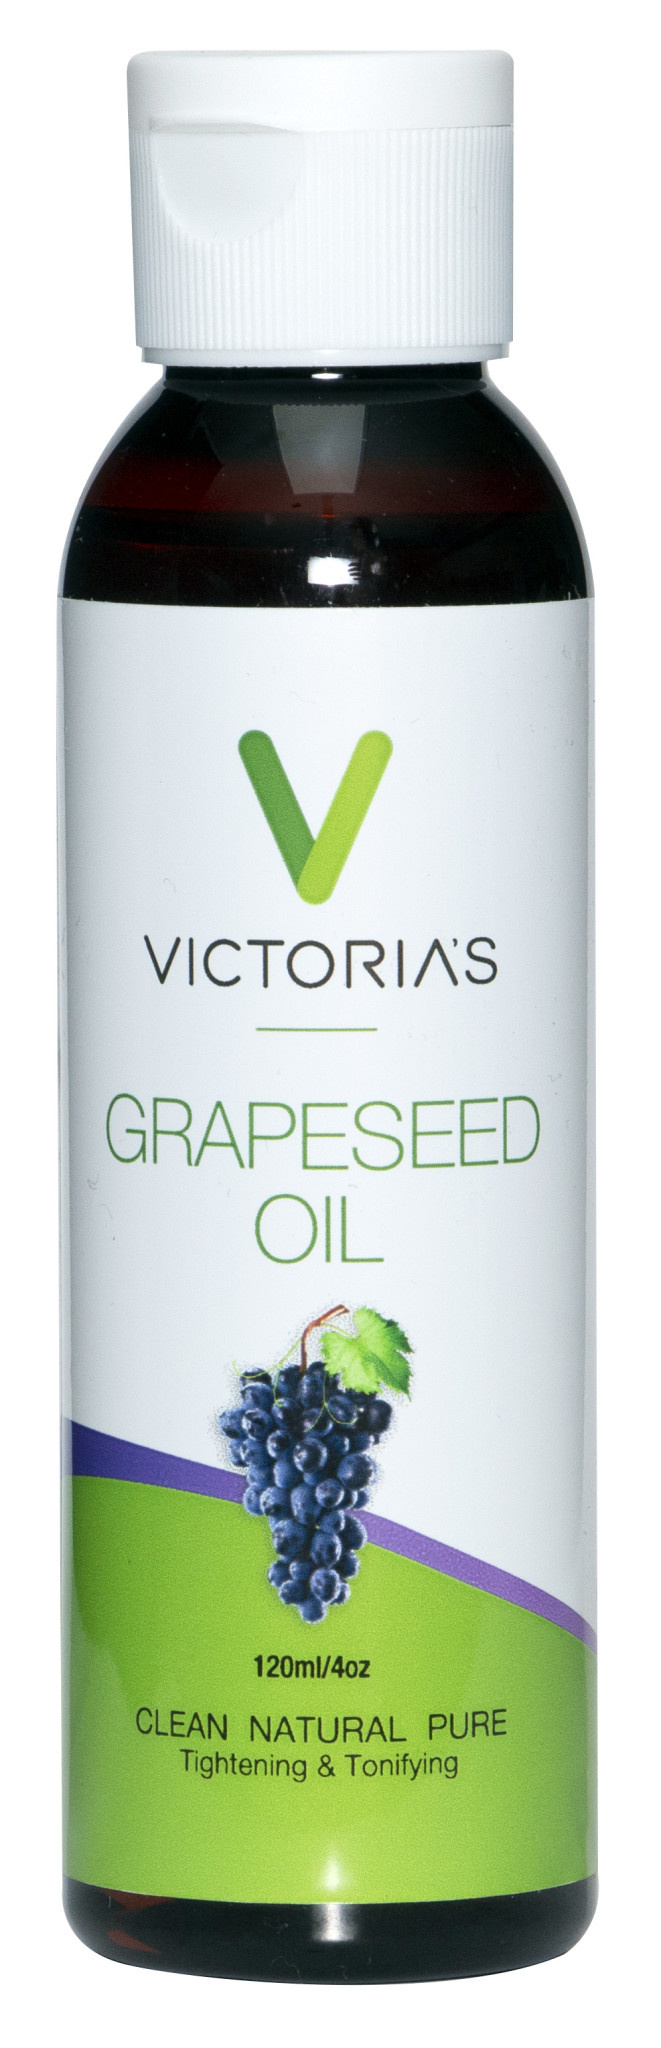 Victoria's - Grapeseed Oil - 120ml